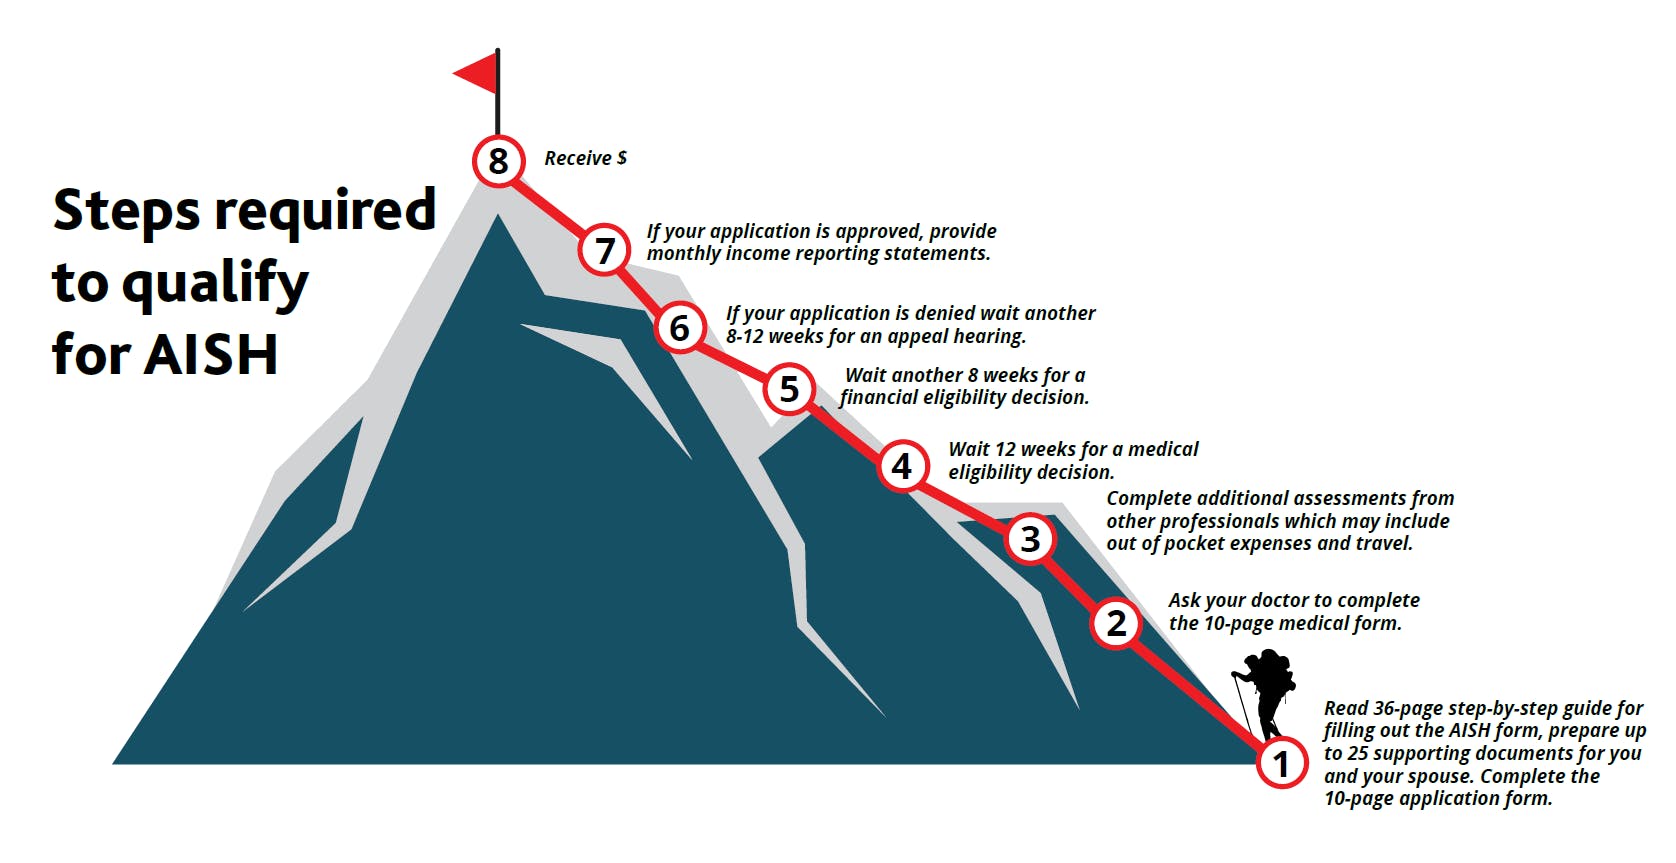 A mountain climber at the bottom of a mountain with 7 steps to qualify for AISH leading to a flag at the top.